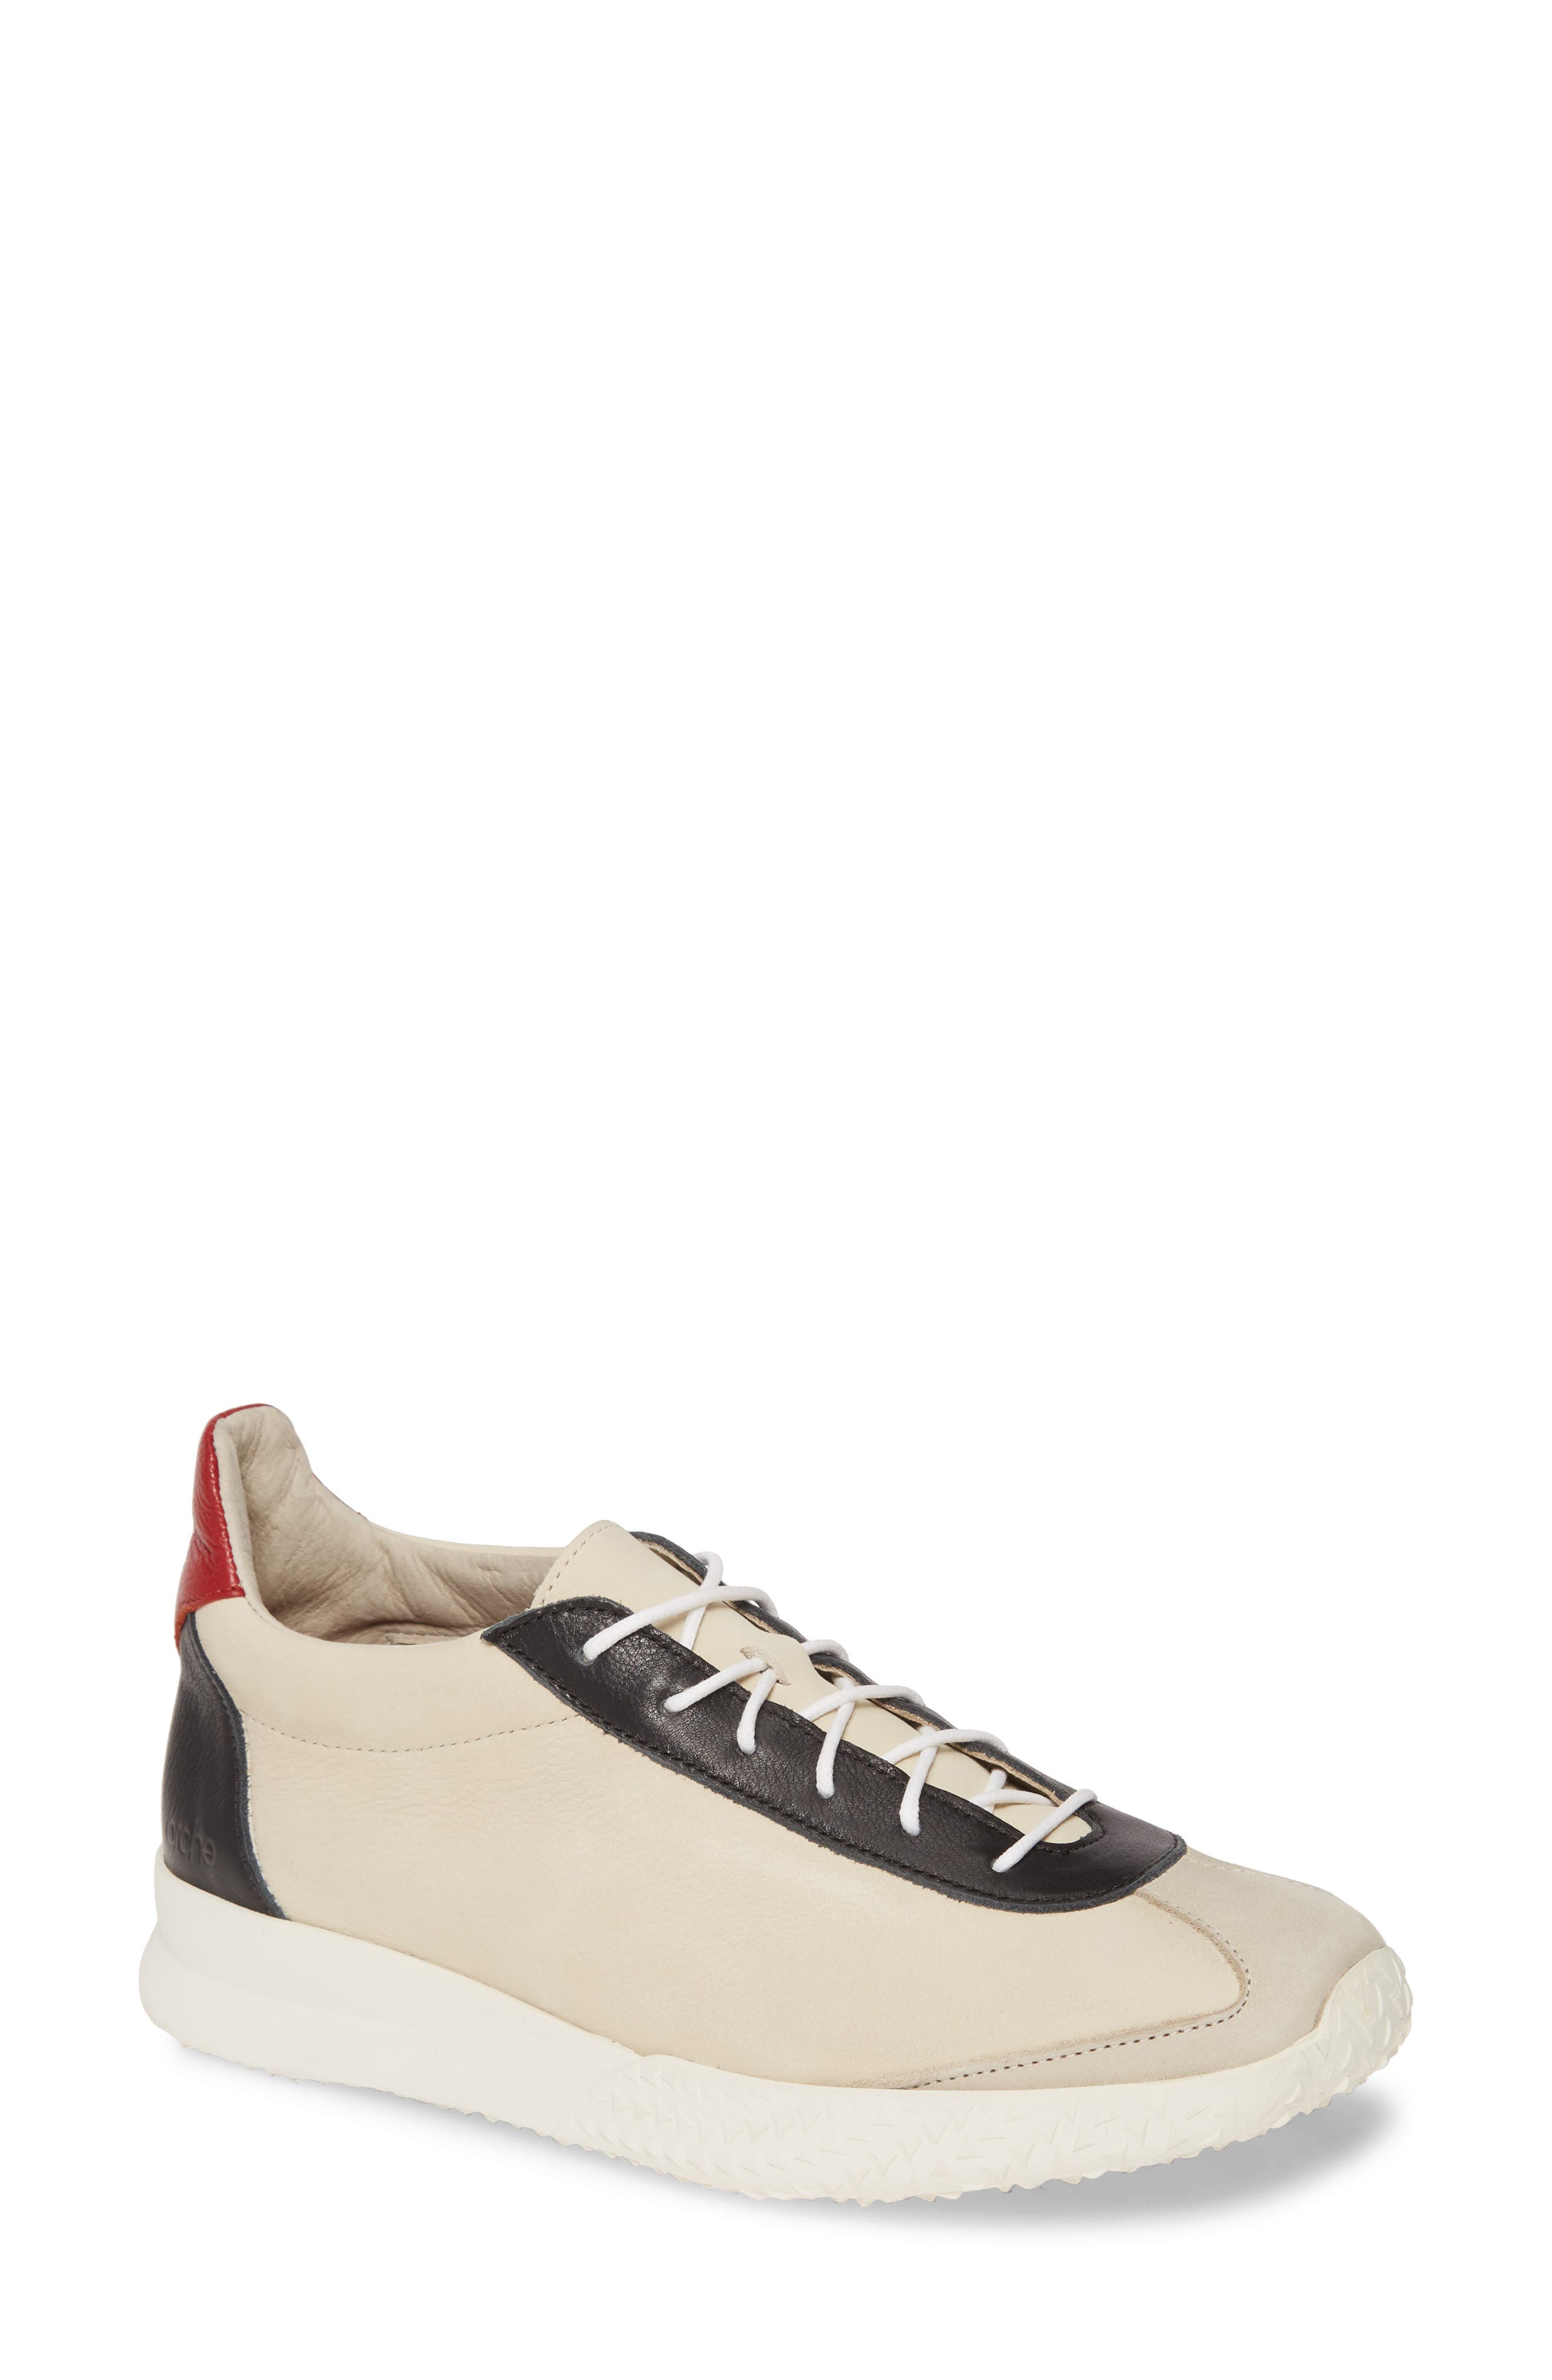 Women's Offwhite Arche Shoes | Nordstrom